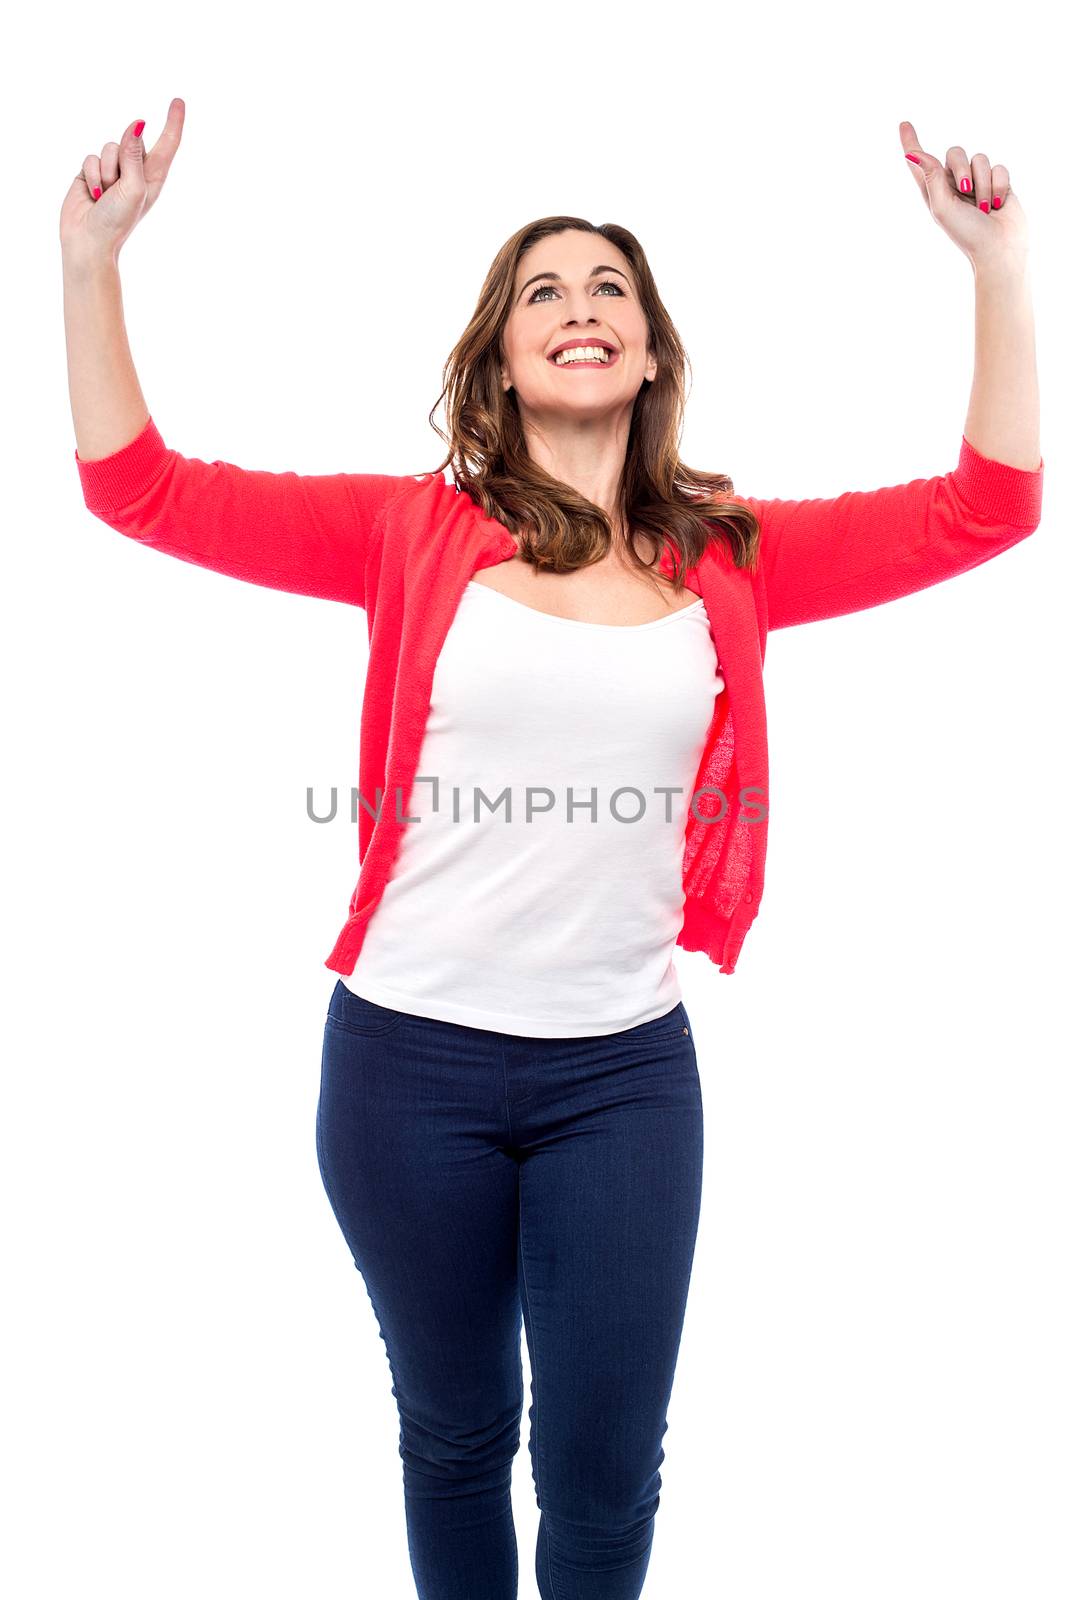 Happy woman celebrating with her arms raised